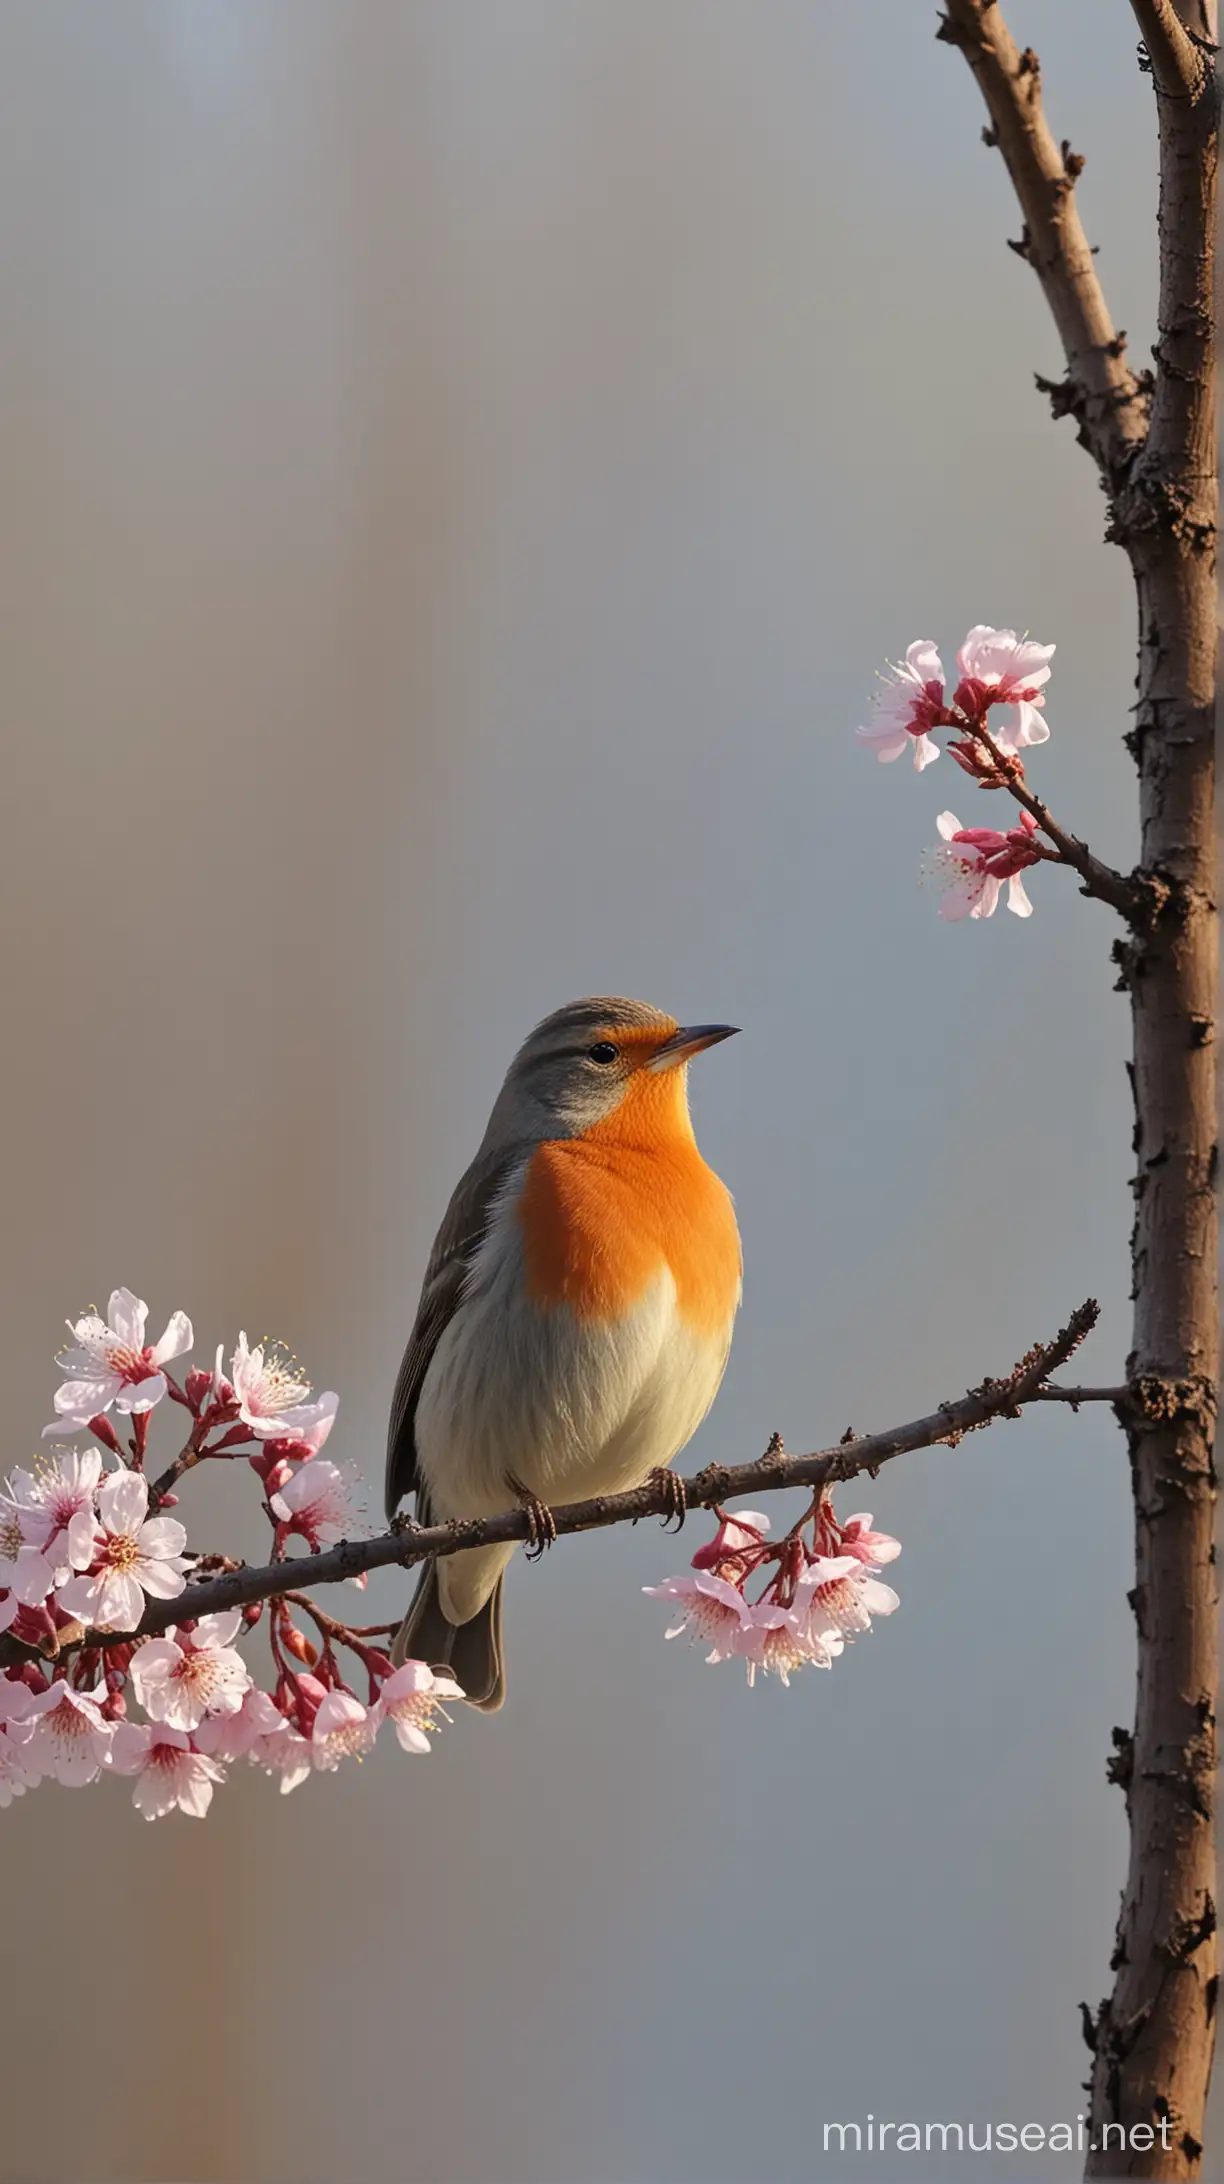 Morning Melodies A Bird Singing on a BlossomCovered Tree